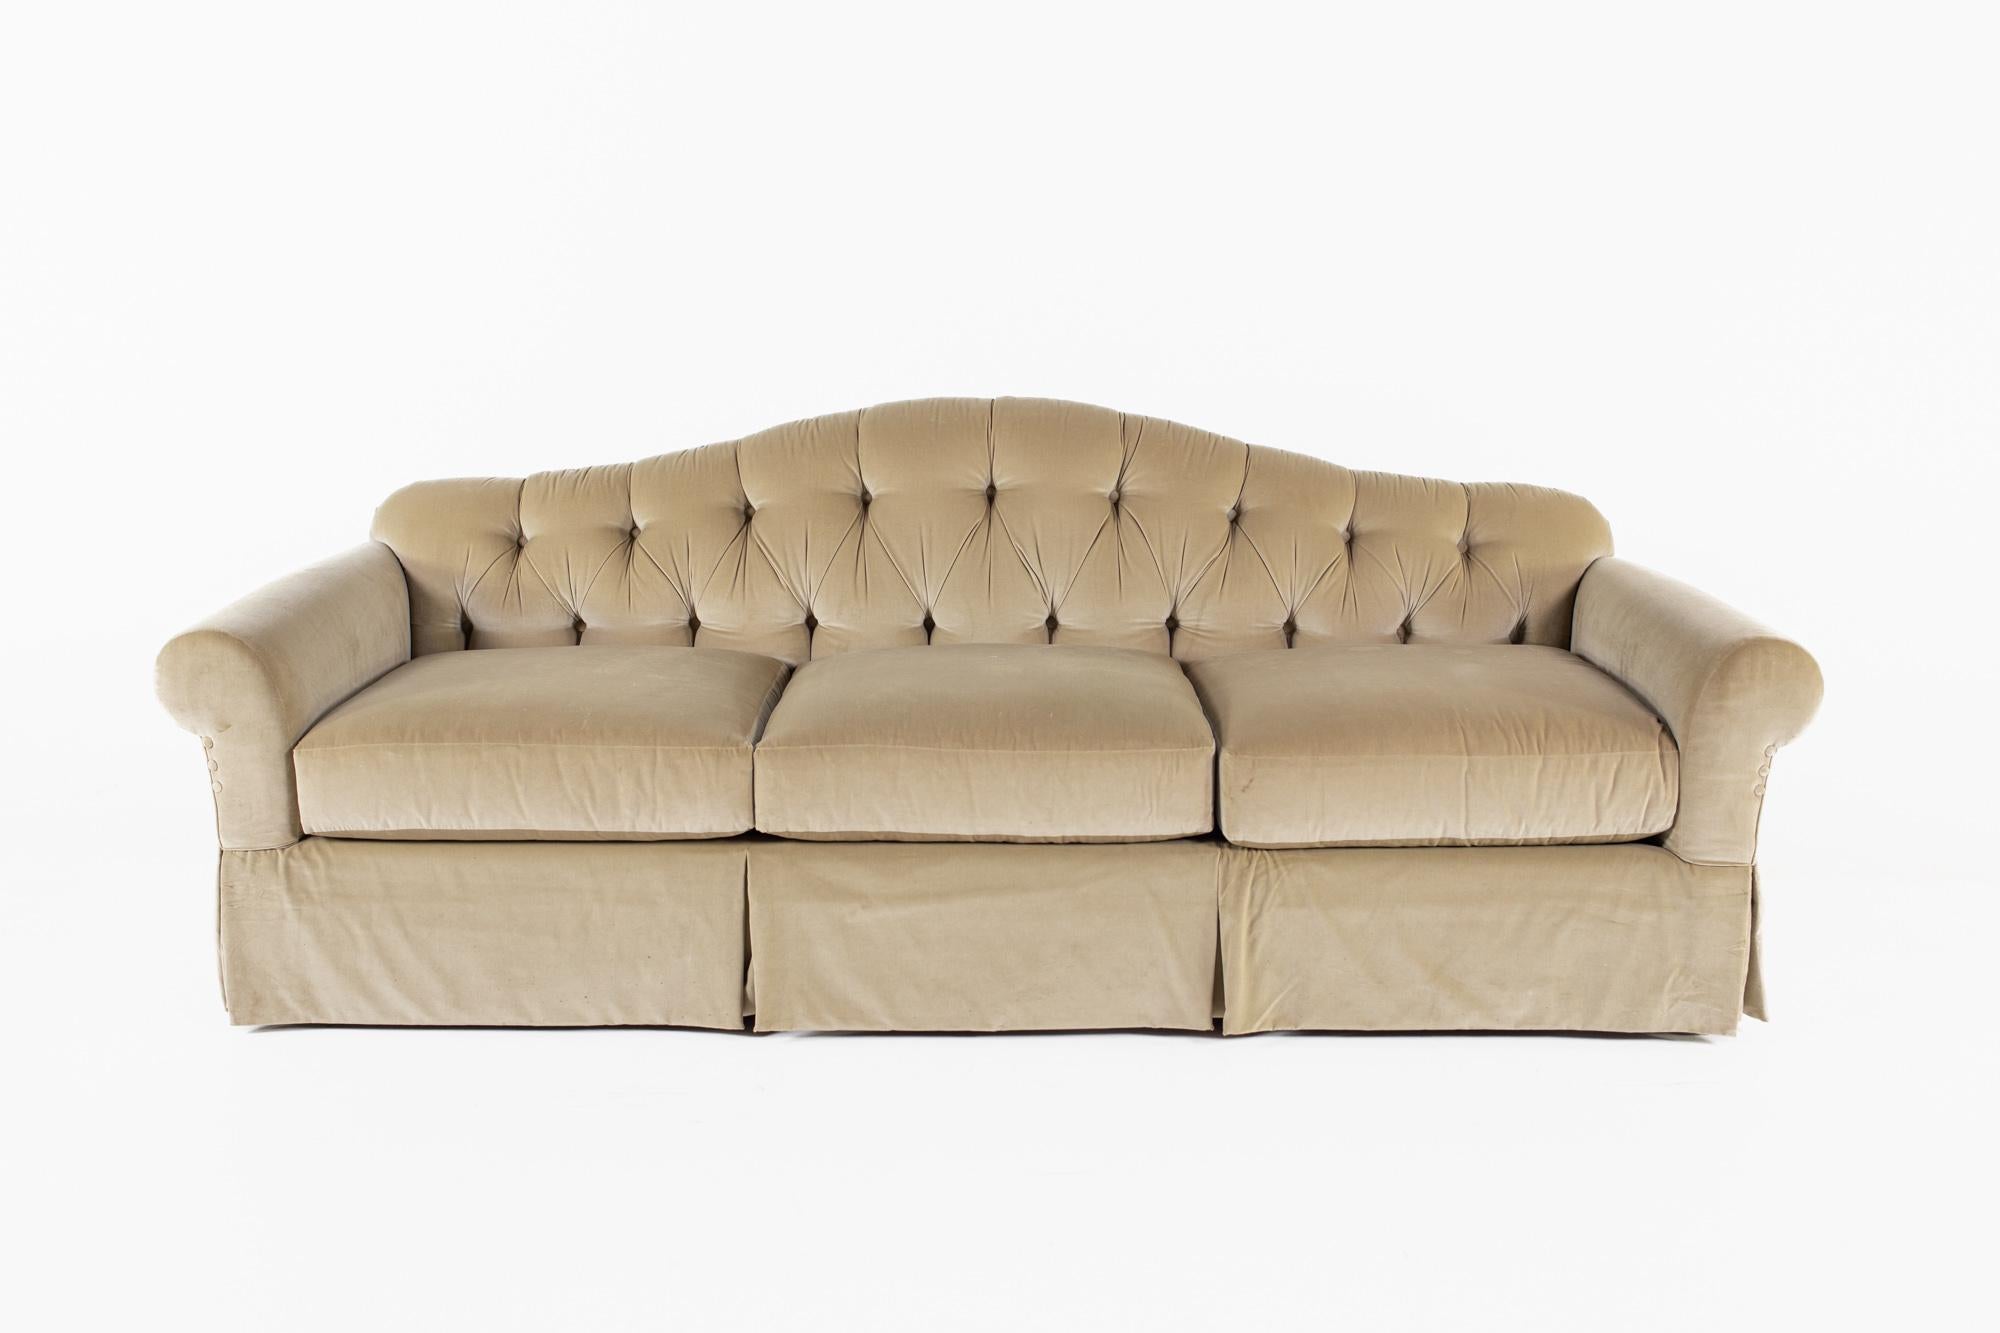 Baker Furniture Beige Tufted Chesterfield Velvet Sofa

This sofa measures: 95 wide x 38 deep x 33 inches high, with a seat height of 17 inches

This sofa is in Good Vintage Condition with some fabric loose on back edge, minor marks, dents, and